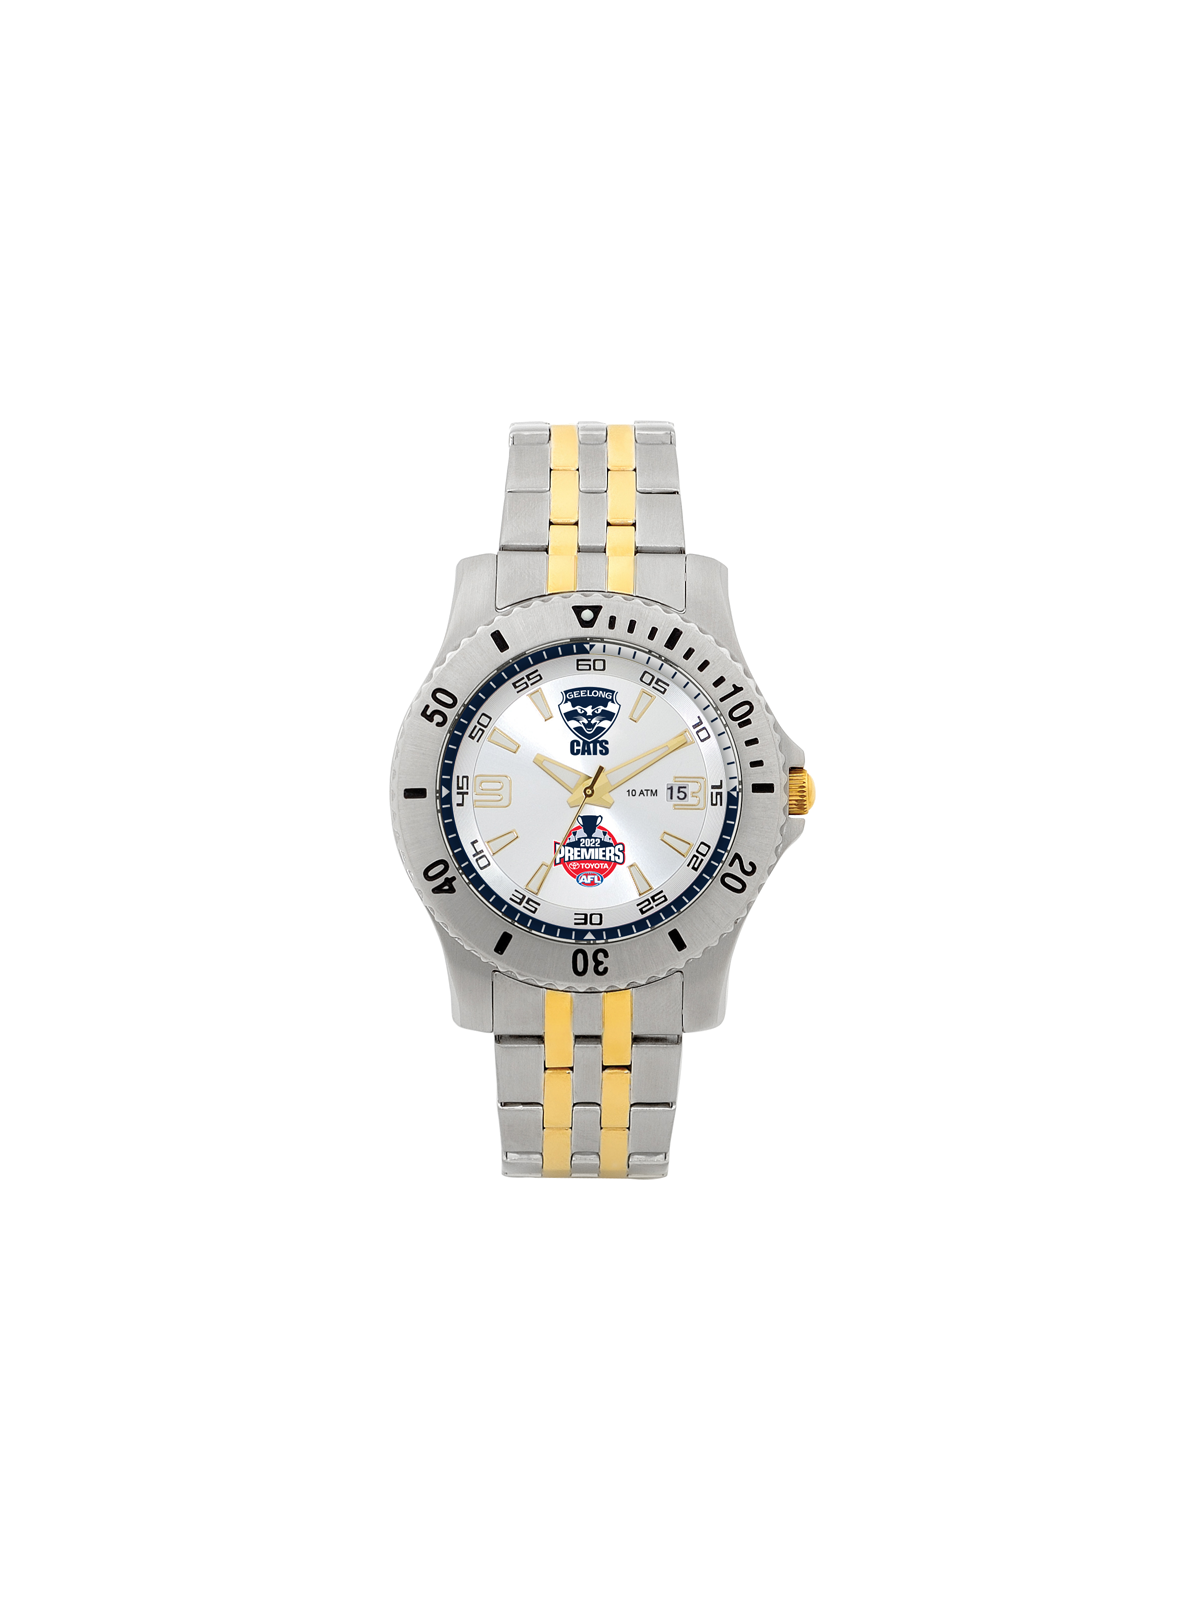 Geelong Cats AFL Premiers Limited Edition Watch